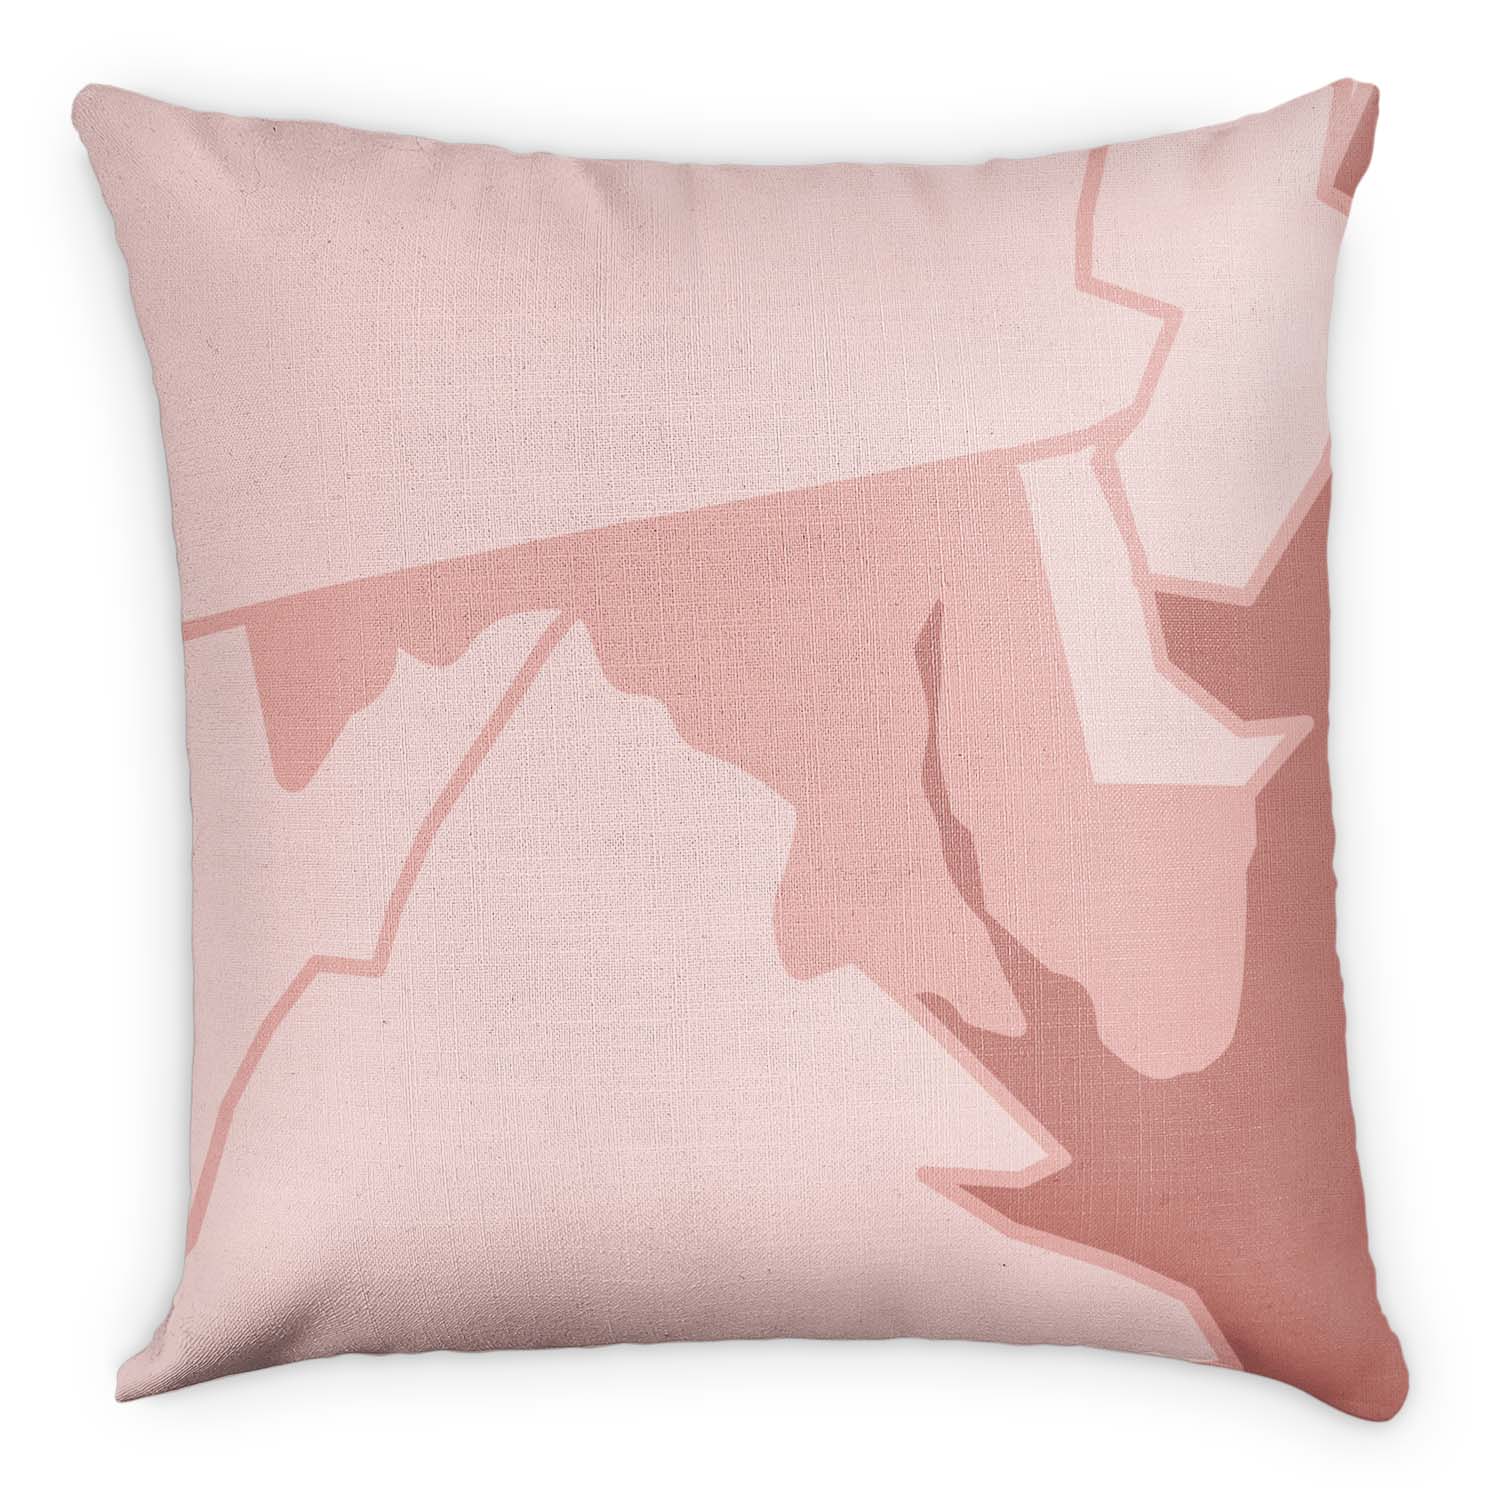 Maryland Square Pillow - Linen -  - Knotty Tie Co.